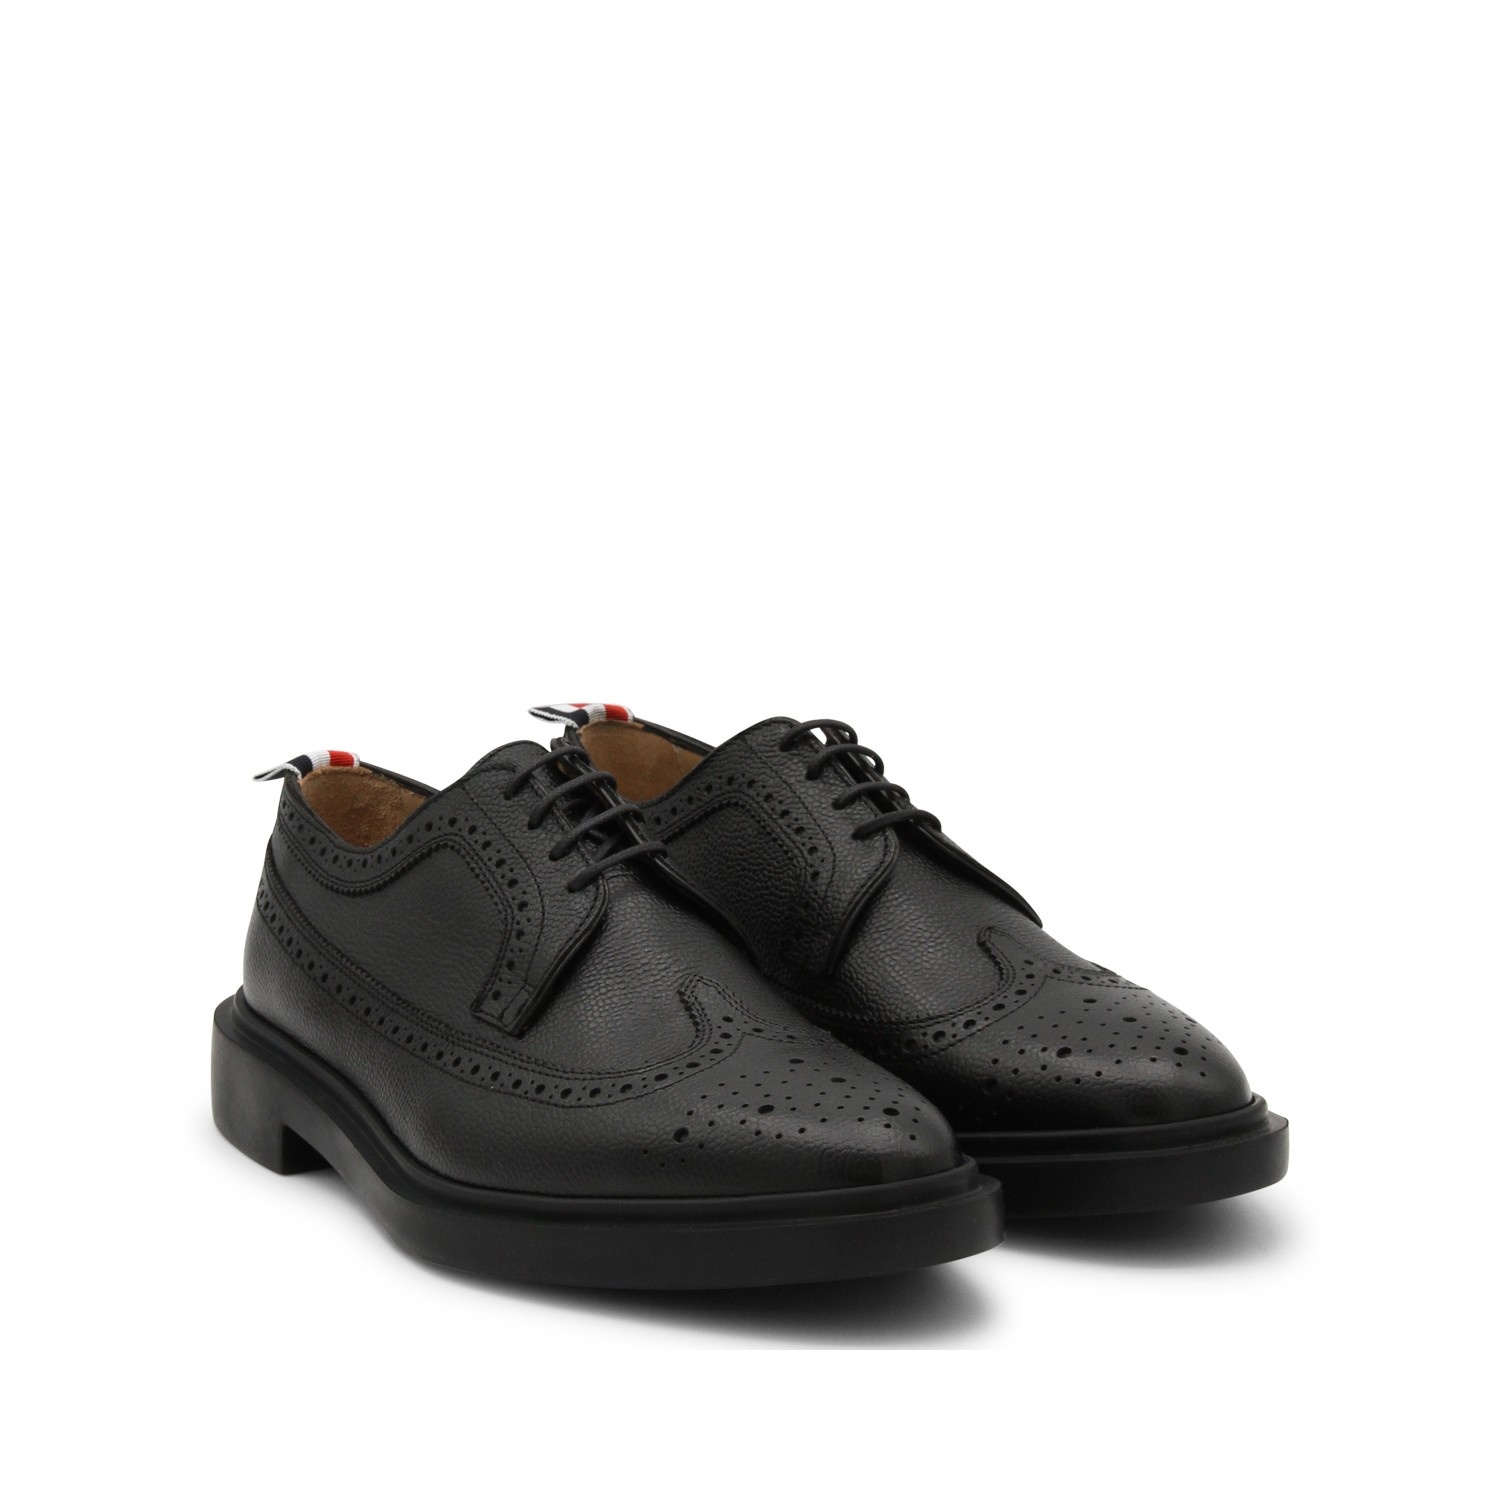 BLACK LEATHER LONGWING BROGUES - 2